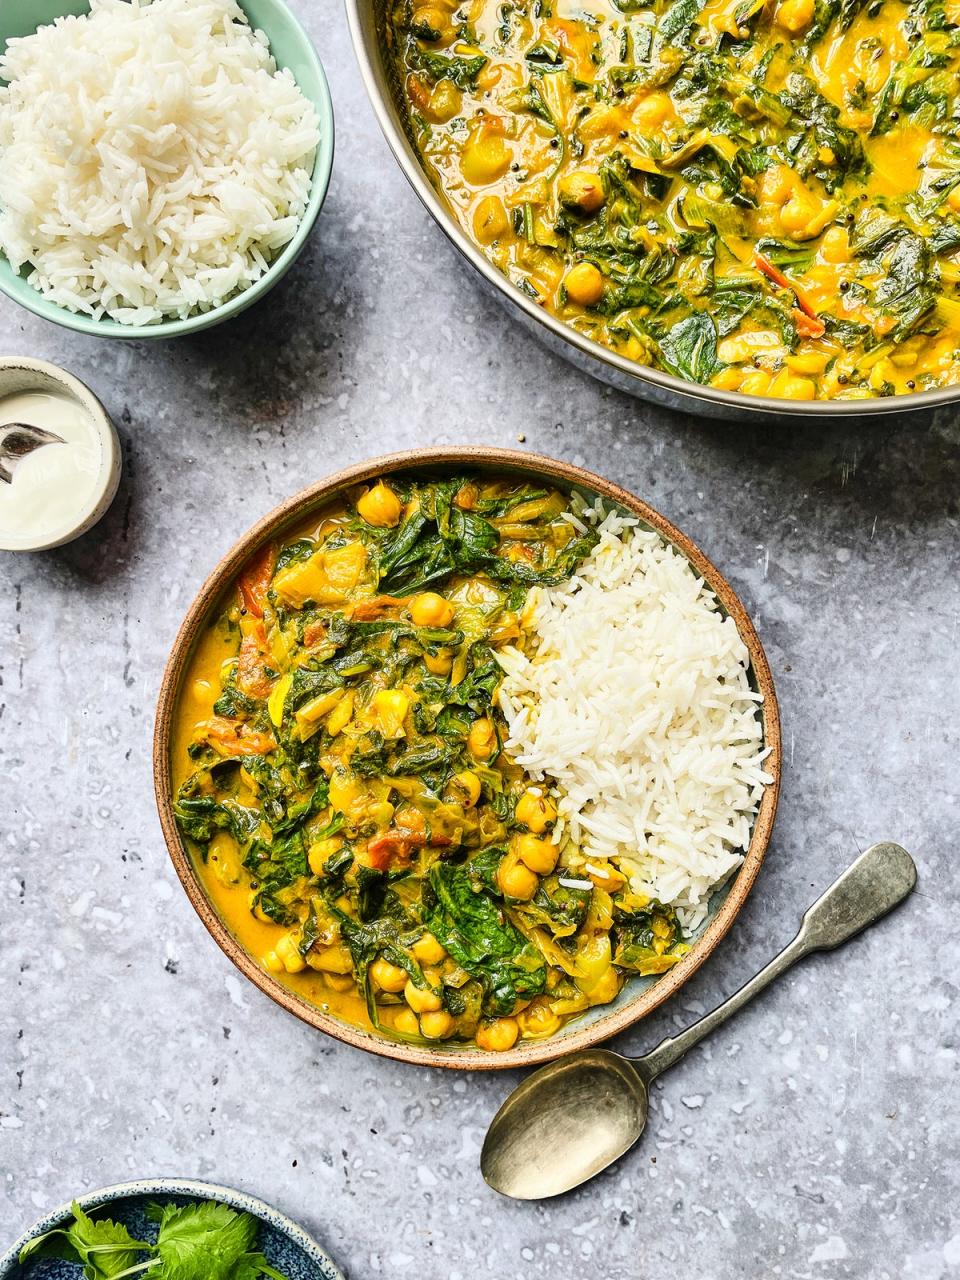 For those looking for an easy but nutritious Monday night dinner, the saag channa masala is a tasty plant-based option (Discover Great Veg)